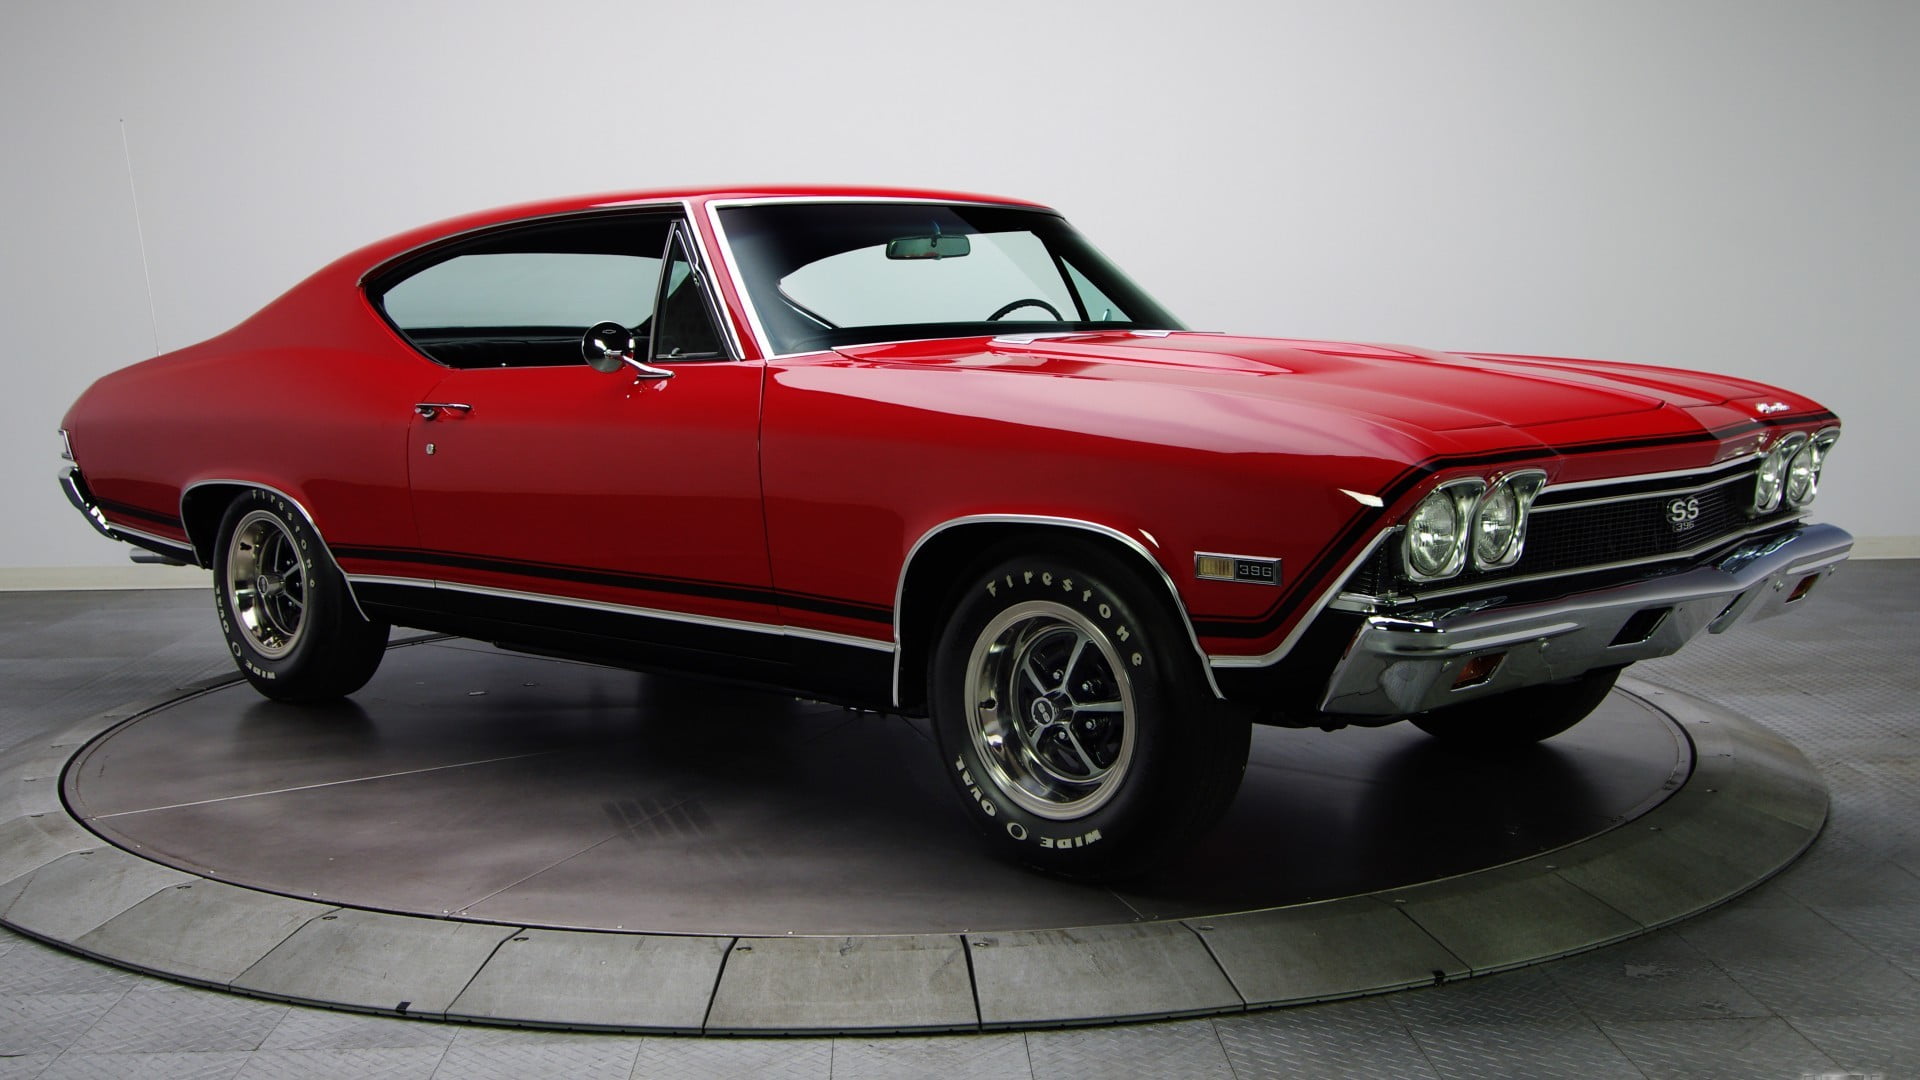 red coupe, Chevrolet Chevelle HD wallpaper.